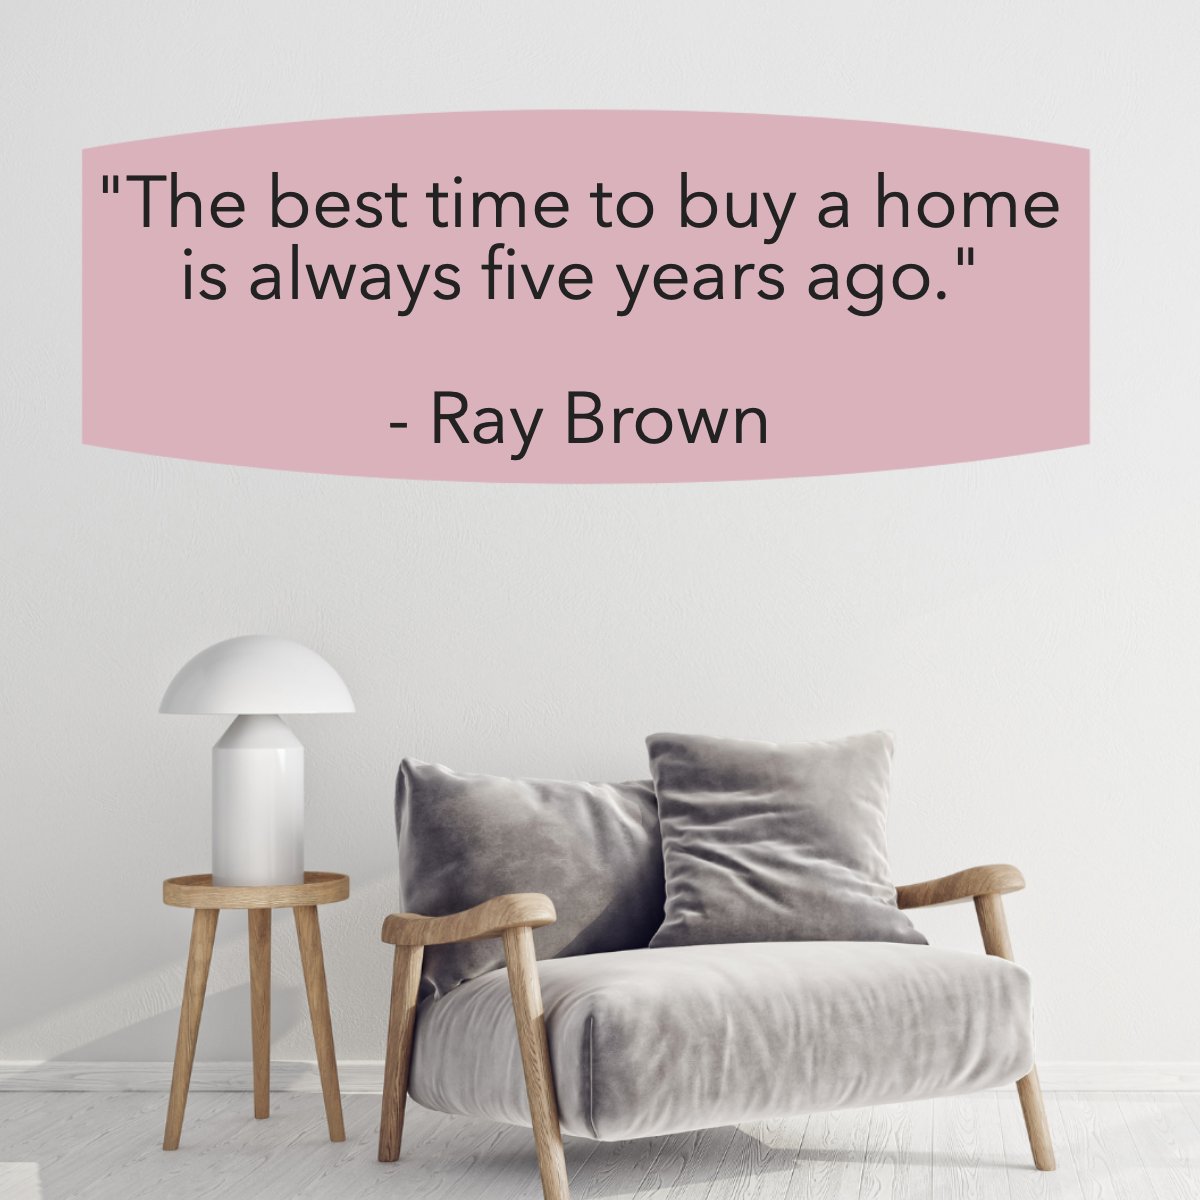 'The best time to buy a home is always five years ago'
― Ray Brown 📖

#home #homesale #hometime #besttimetobuy #quoteoftheday #quotes #raybrown
 #thepropertyexchangegroup #InvestingInRealEstate #1031Exchange #SouthJerseyHomes #PhillyRealEstate #WealthBuilding